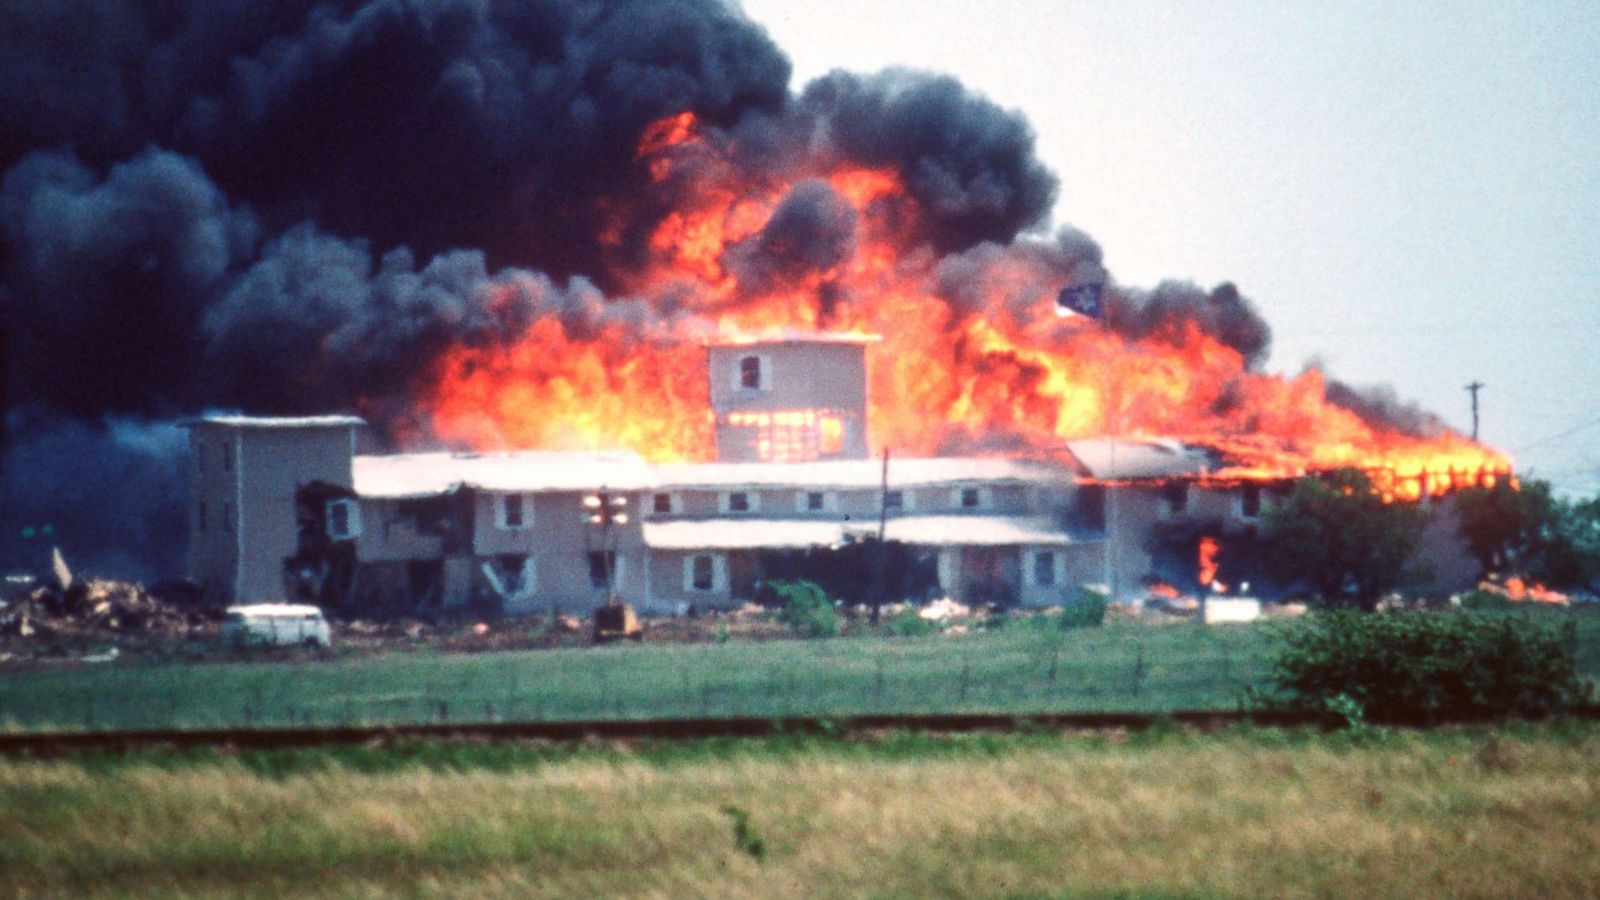 Survivors of 1993 Waco siege describe what happened in fire that ended the  51-day standoff - ABC News